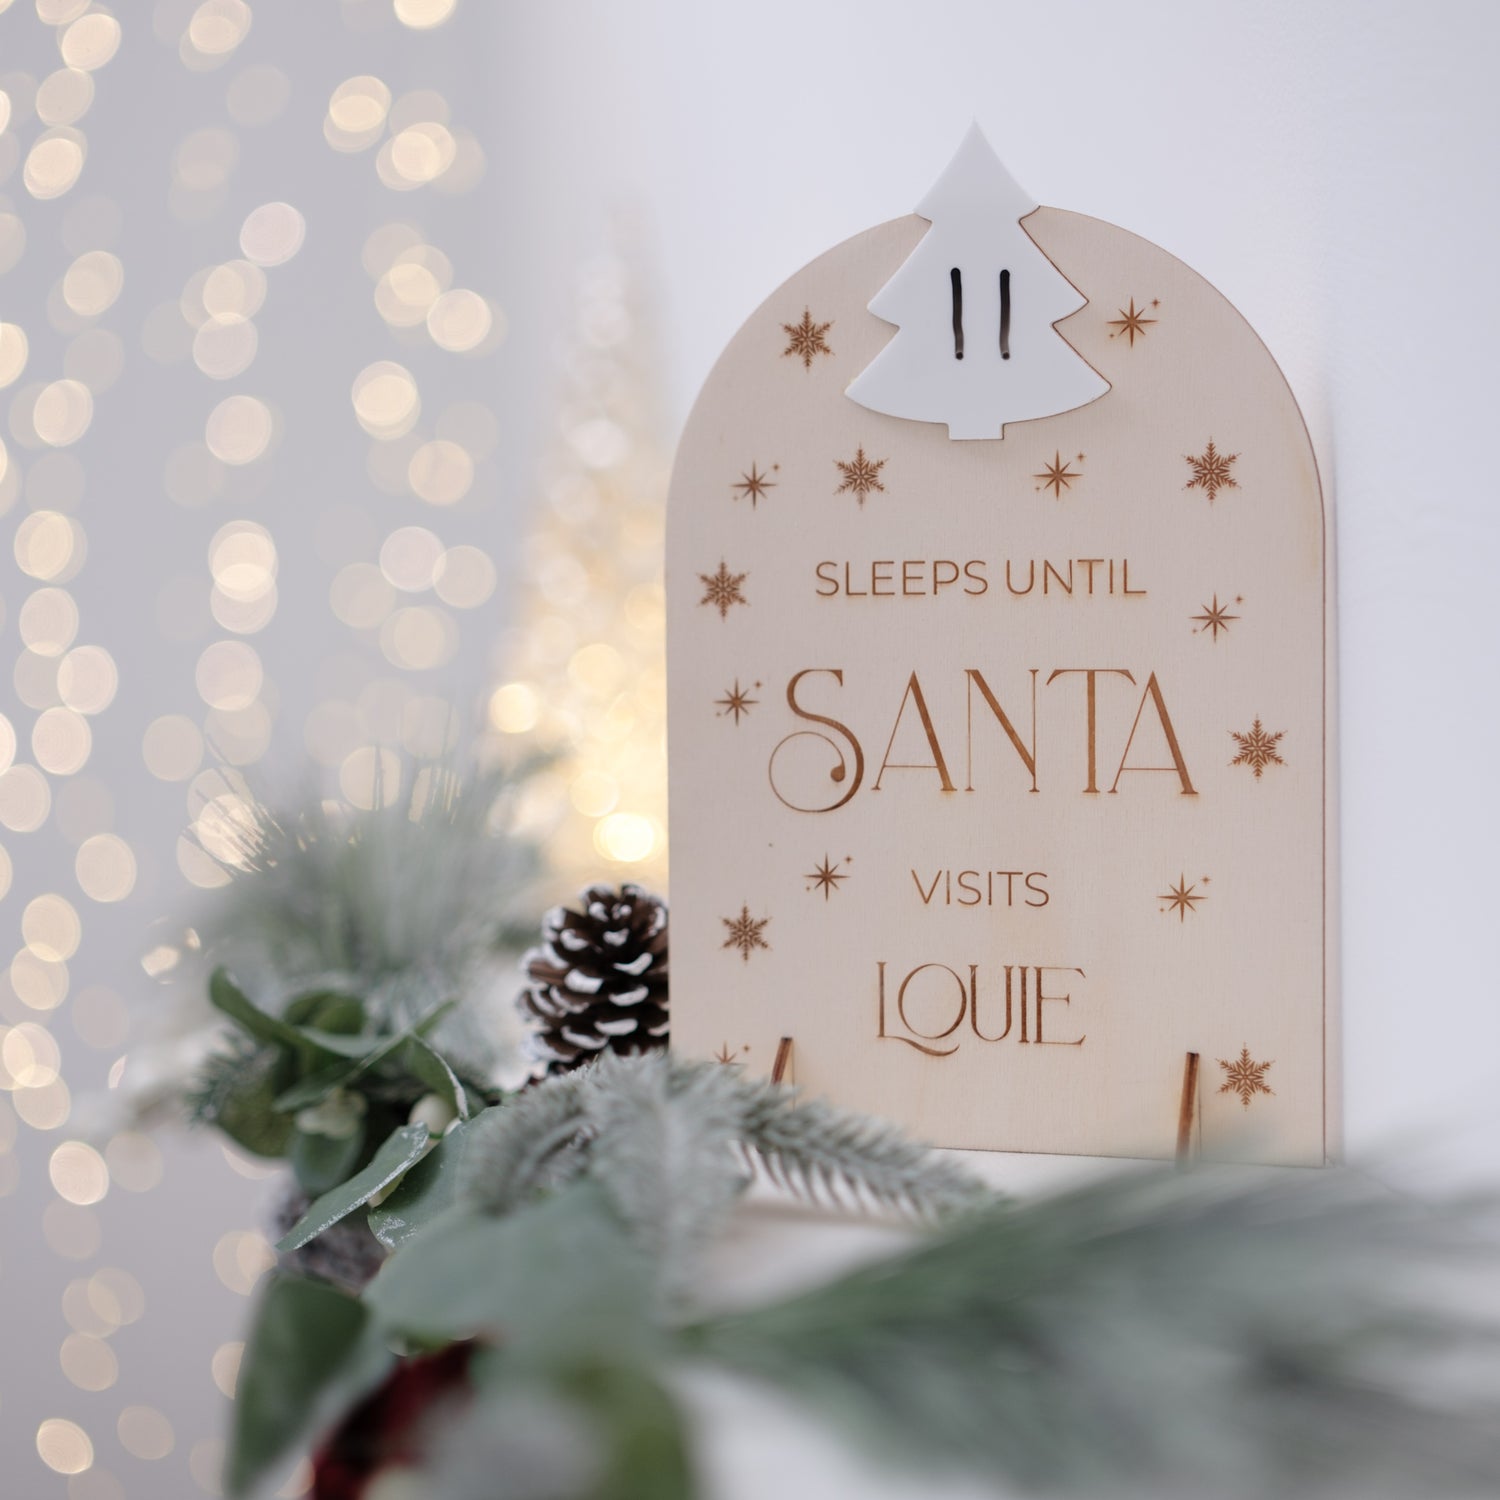 6 Christmas Eve Traditions with a Personalised Touch